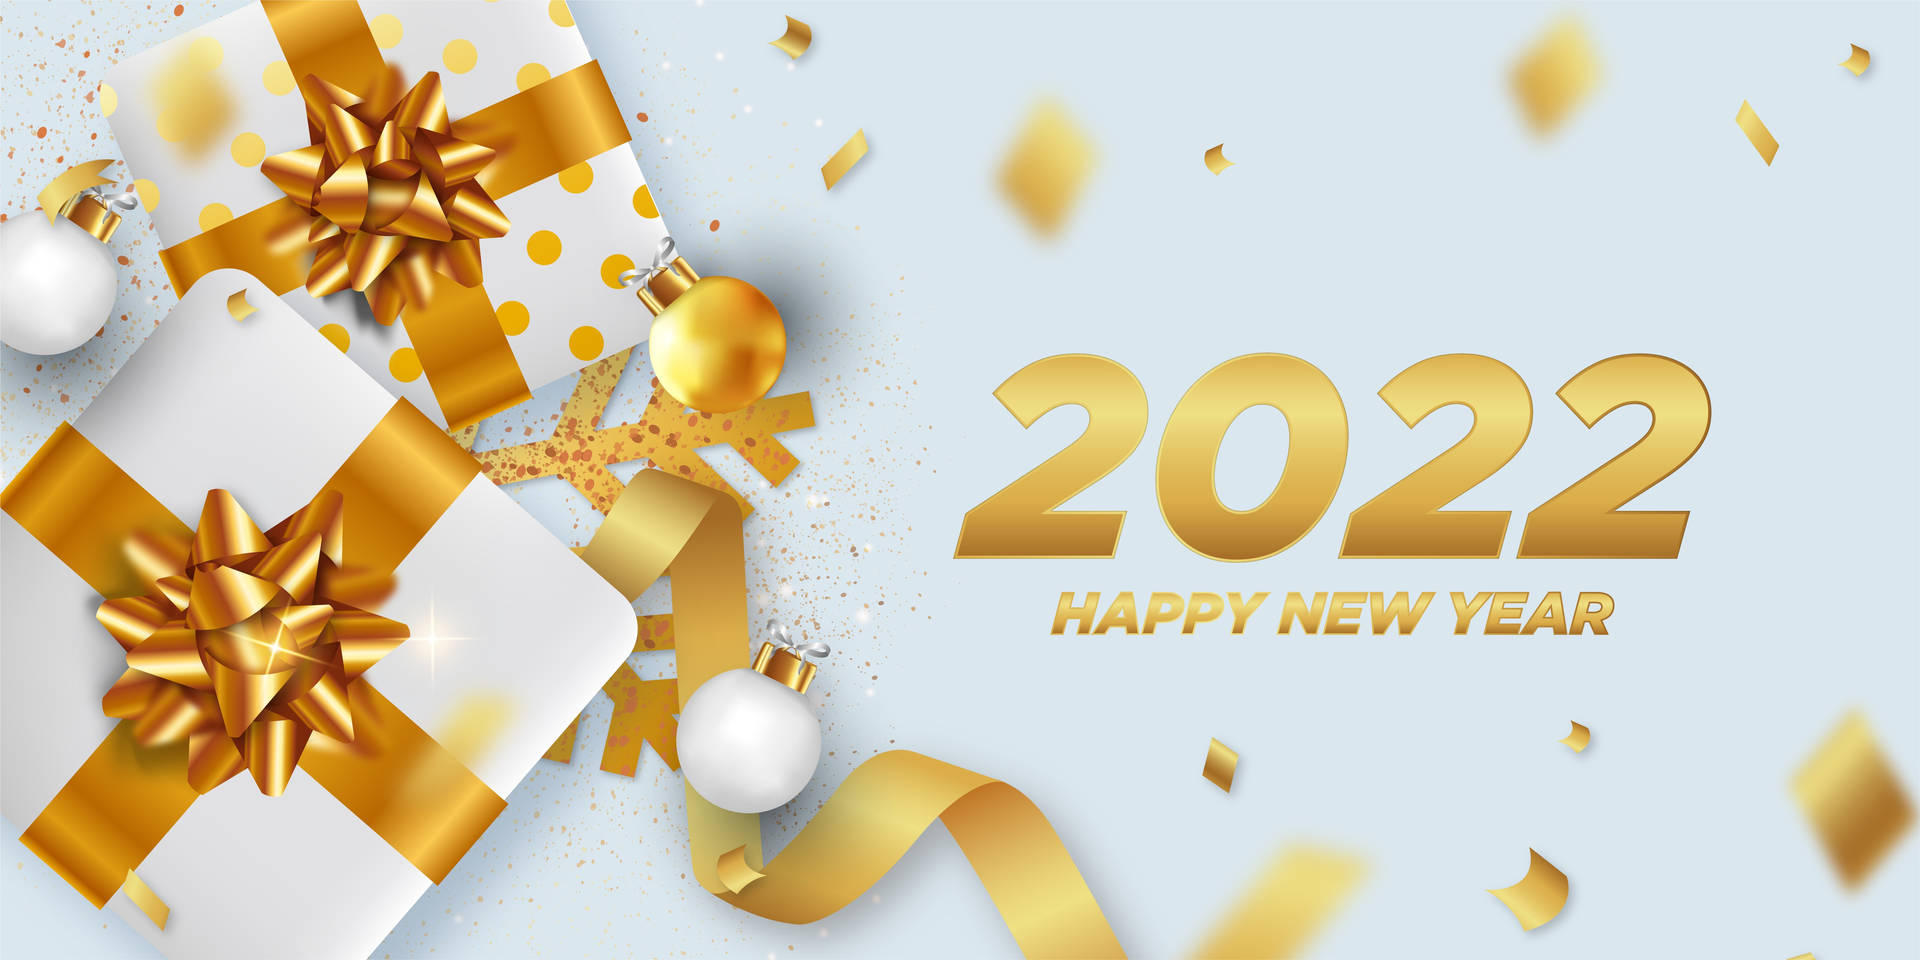 Happy New Year 2022 Gold Gifts